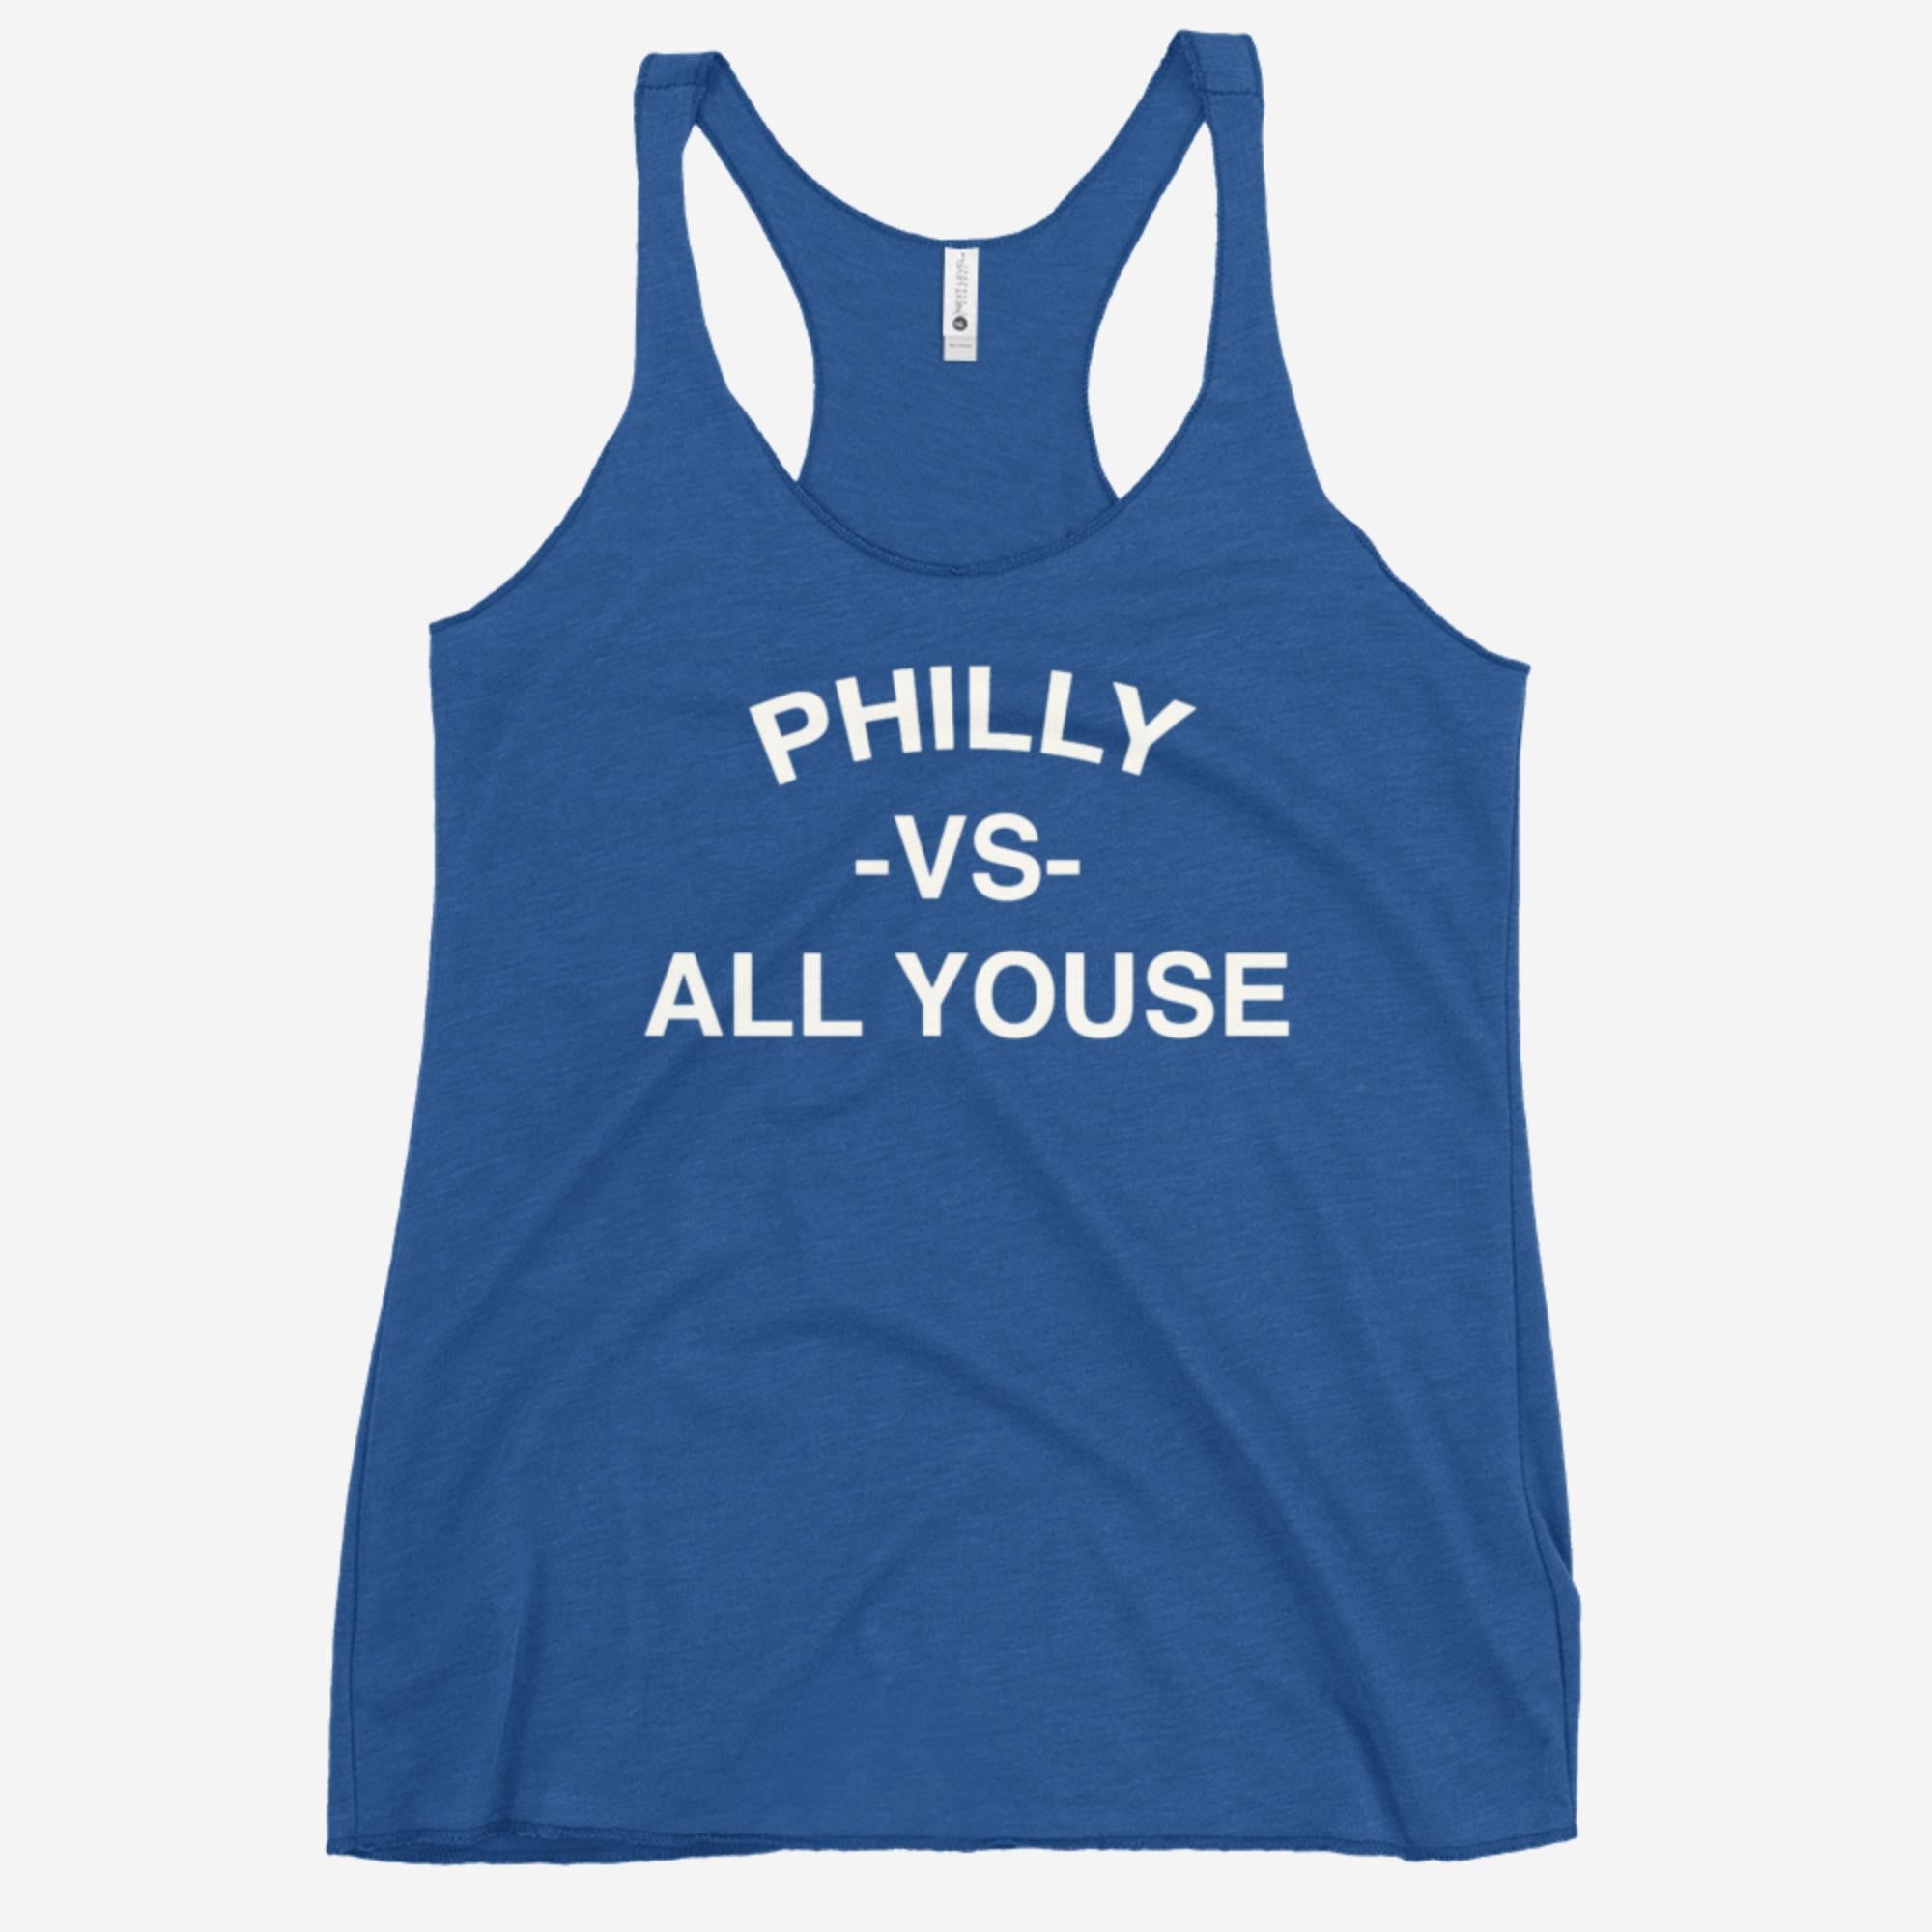 "Philly vs All Youse" Women's Tank Top